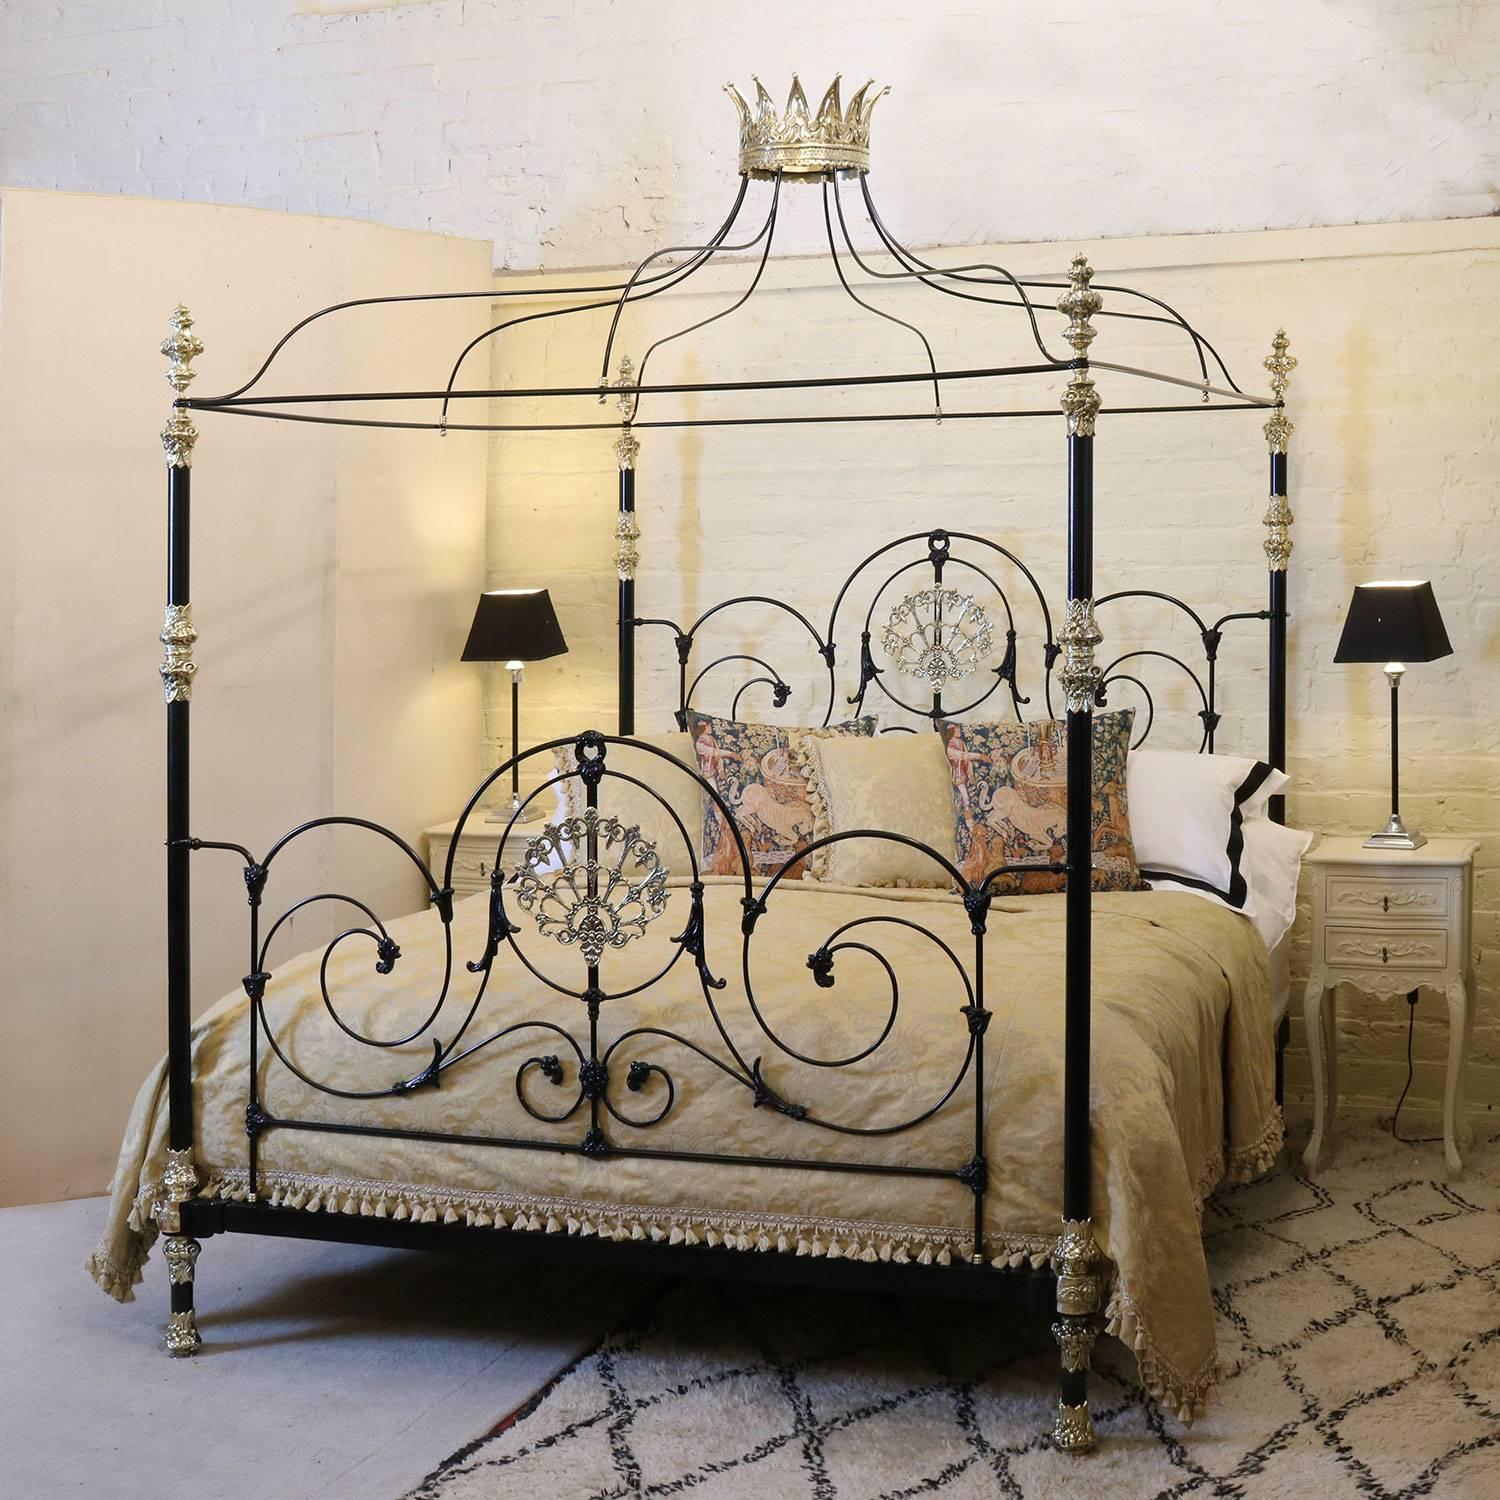 A made-to-order bespoke four-poster bed with ornate brass castings, tentacle canopy and brass crown. This handcrafted bed is a bespoke piece designed with specific dimensions. The bed is currently black but other colours are optional, including